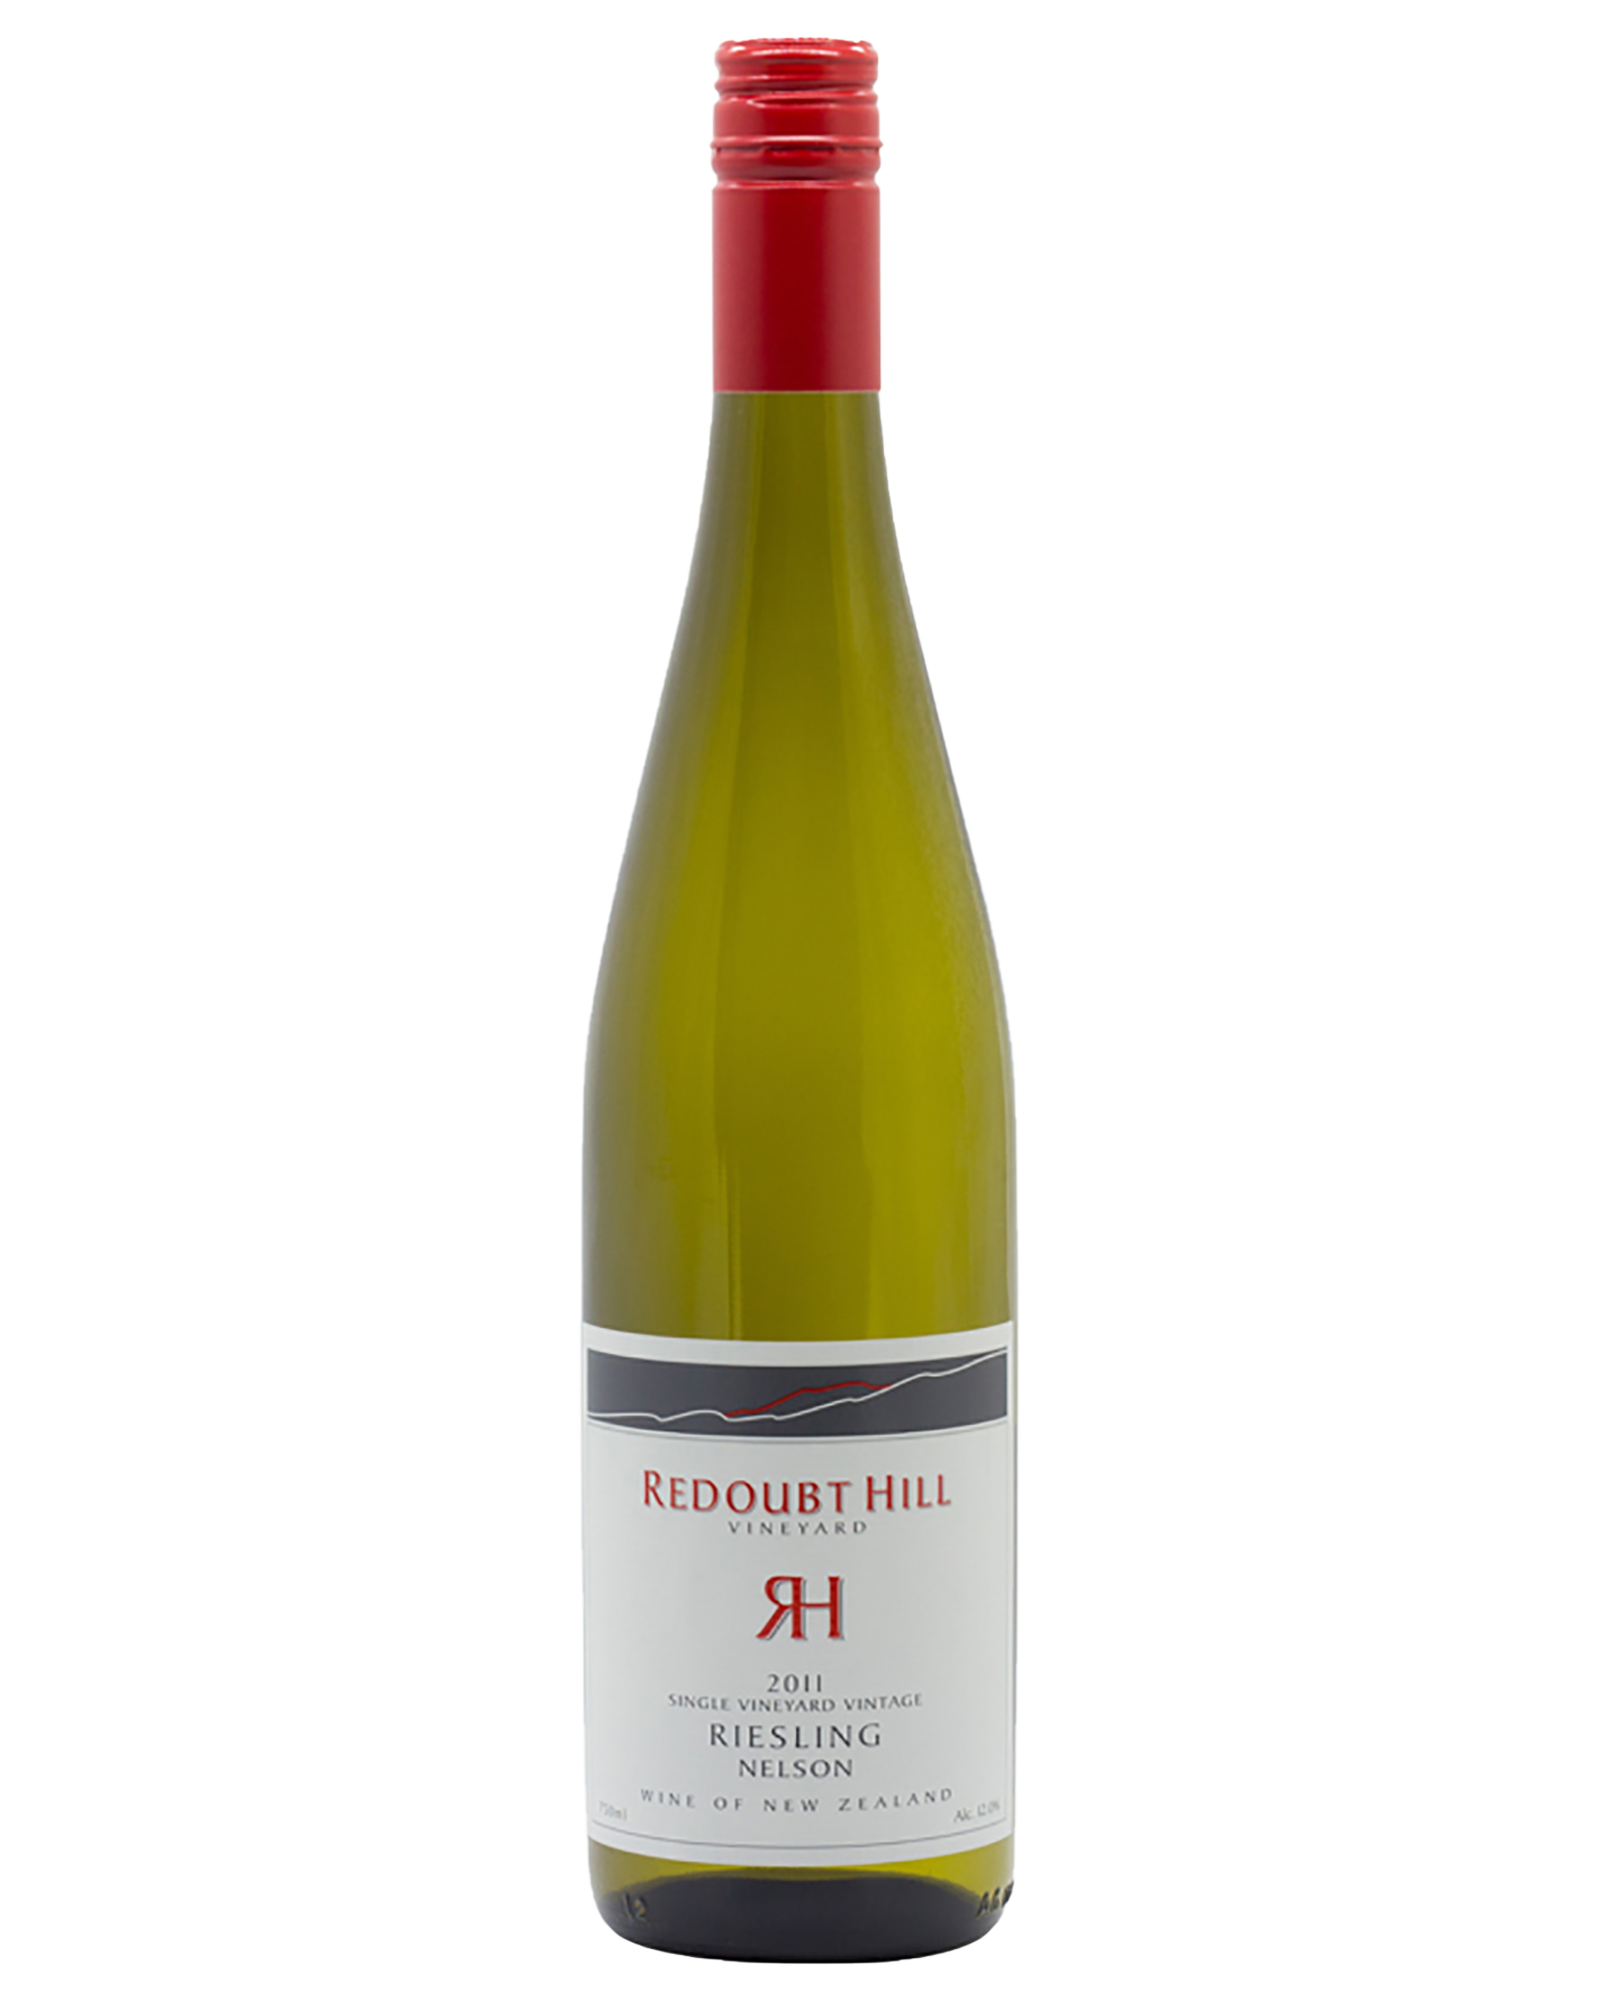 Redoubt Hill Riesling 2011